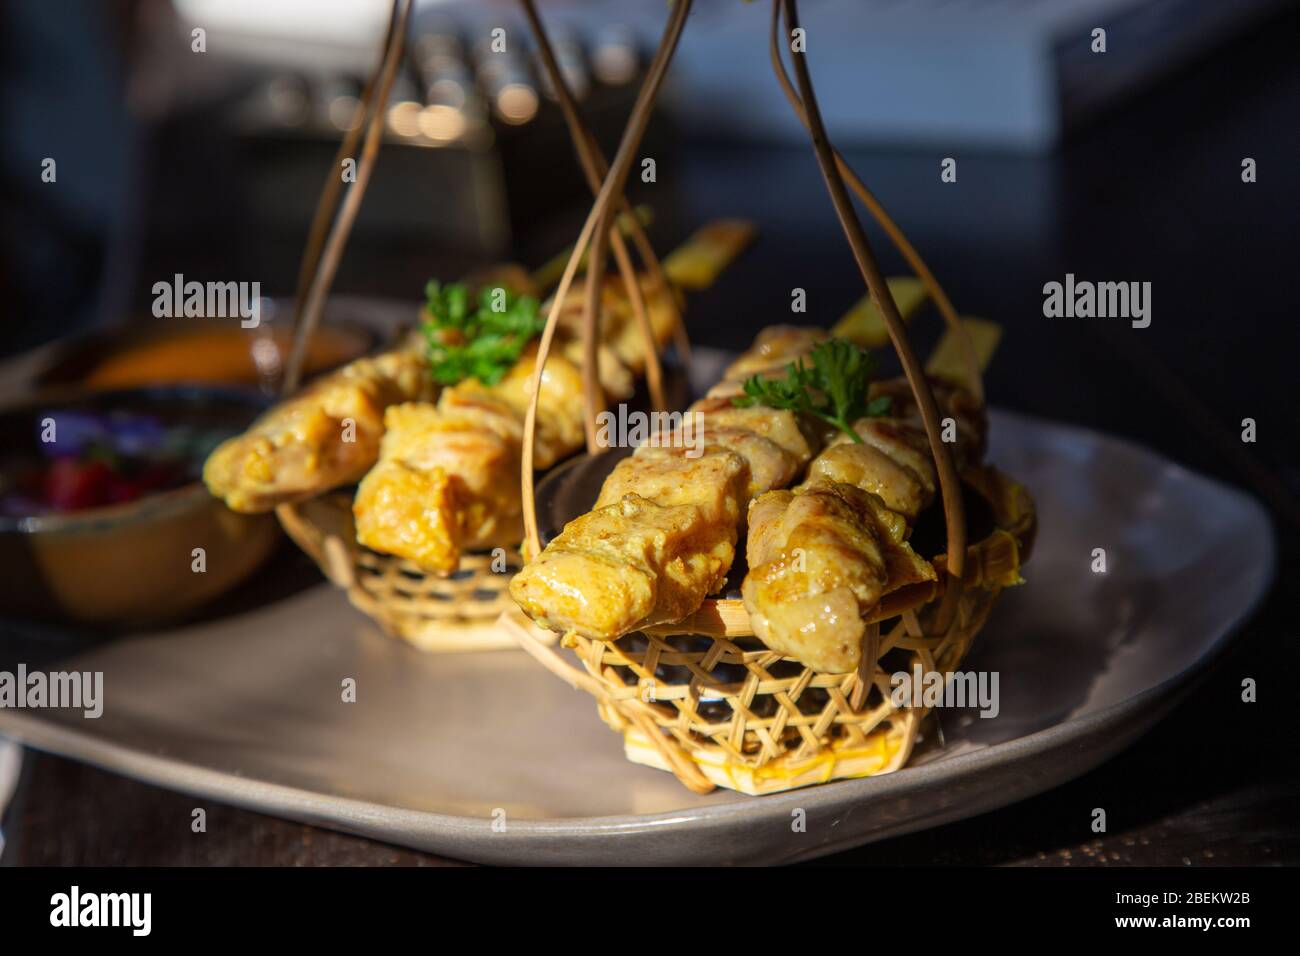 Chicken satay or Chicken kebab skewers on a black ceramic plate with side dishes made from cucumbers, red onions, peppers and Thai dipping sauce. Stock Photo